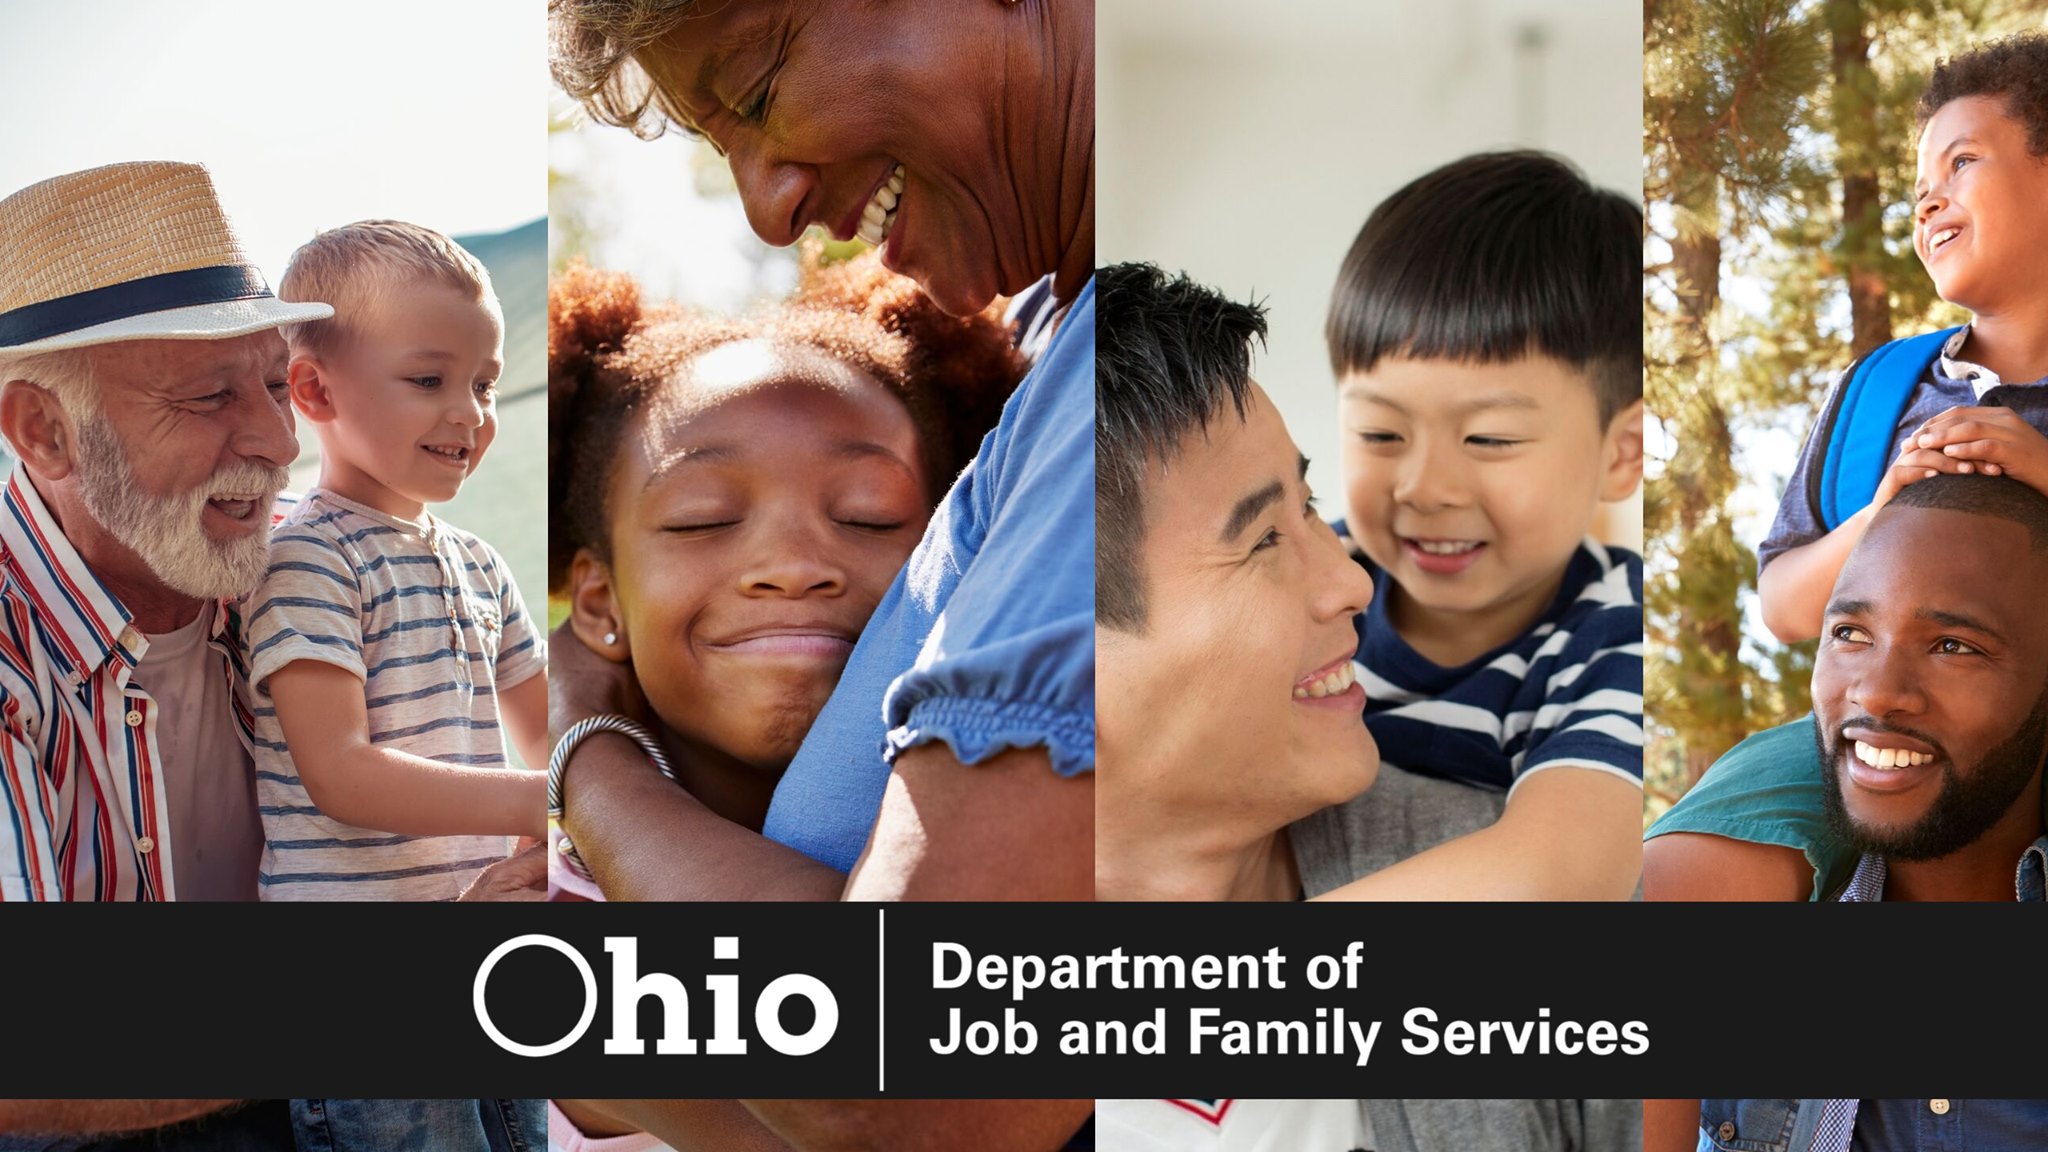 Ohio provides 2nd round of PEBT benefits to provide nutritious food to